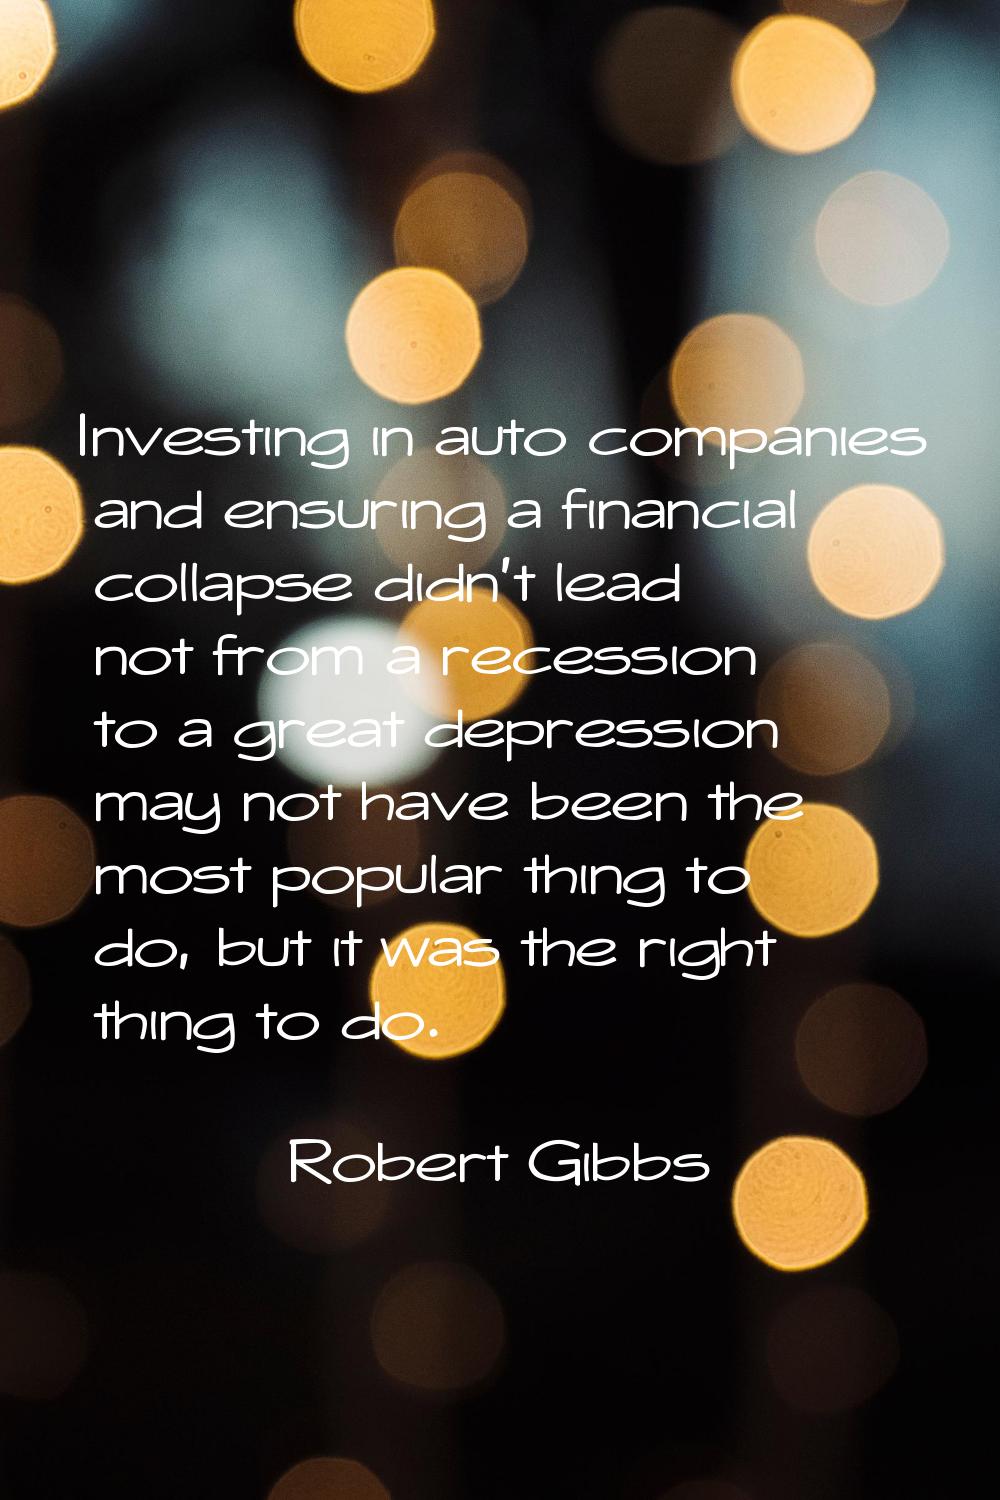 Investing in auto companies and ensuring a financial collapse didn't lead not from a recession to a